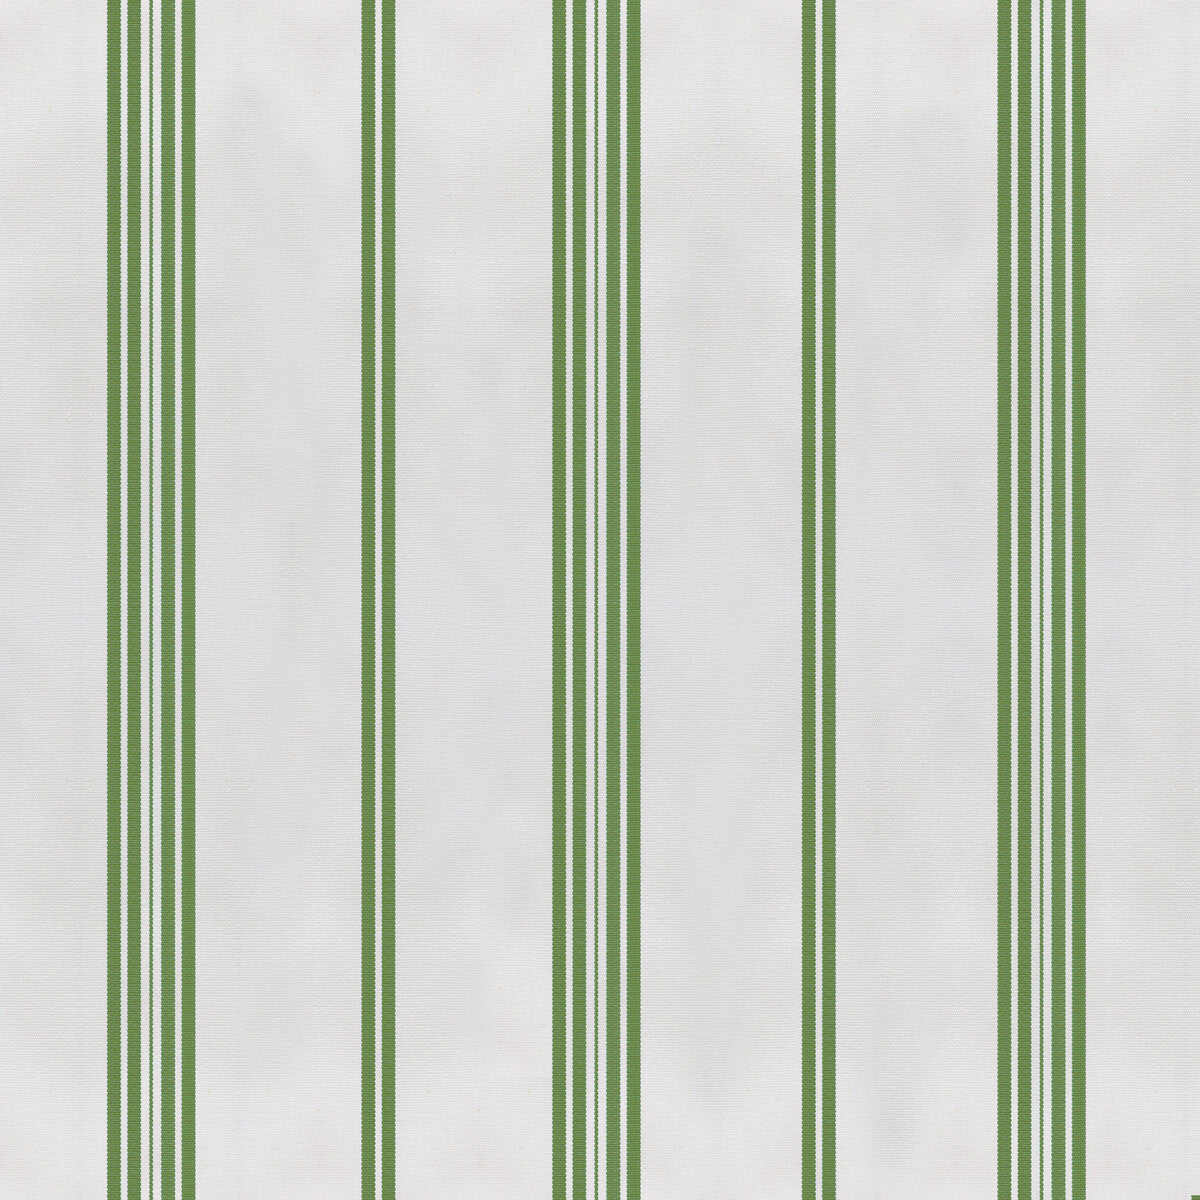 Tramontana fabric in verde claro color - pattern GDT5673.006.0 - by Gaston y Daniela in the Gaston Maiorica collection